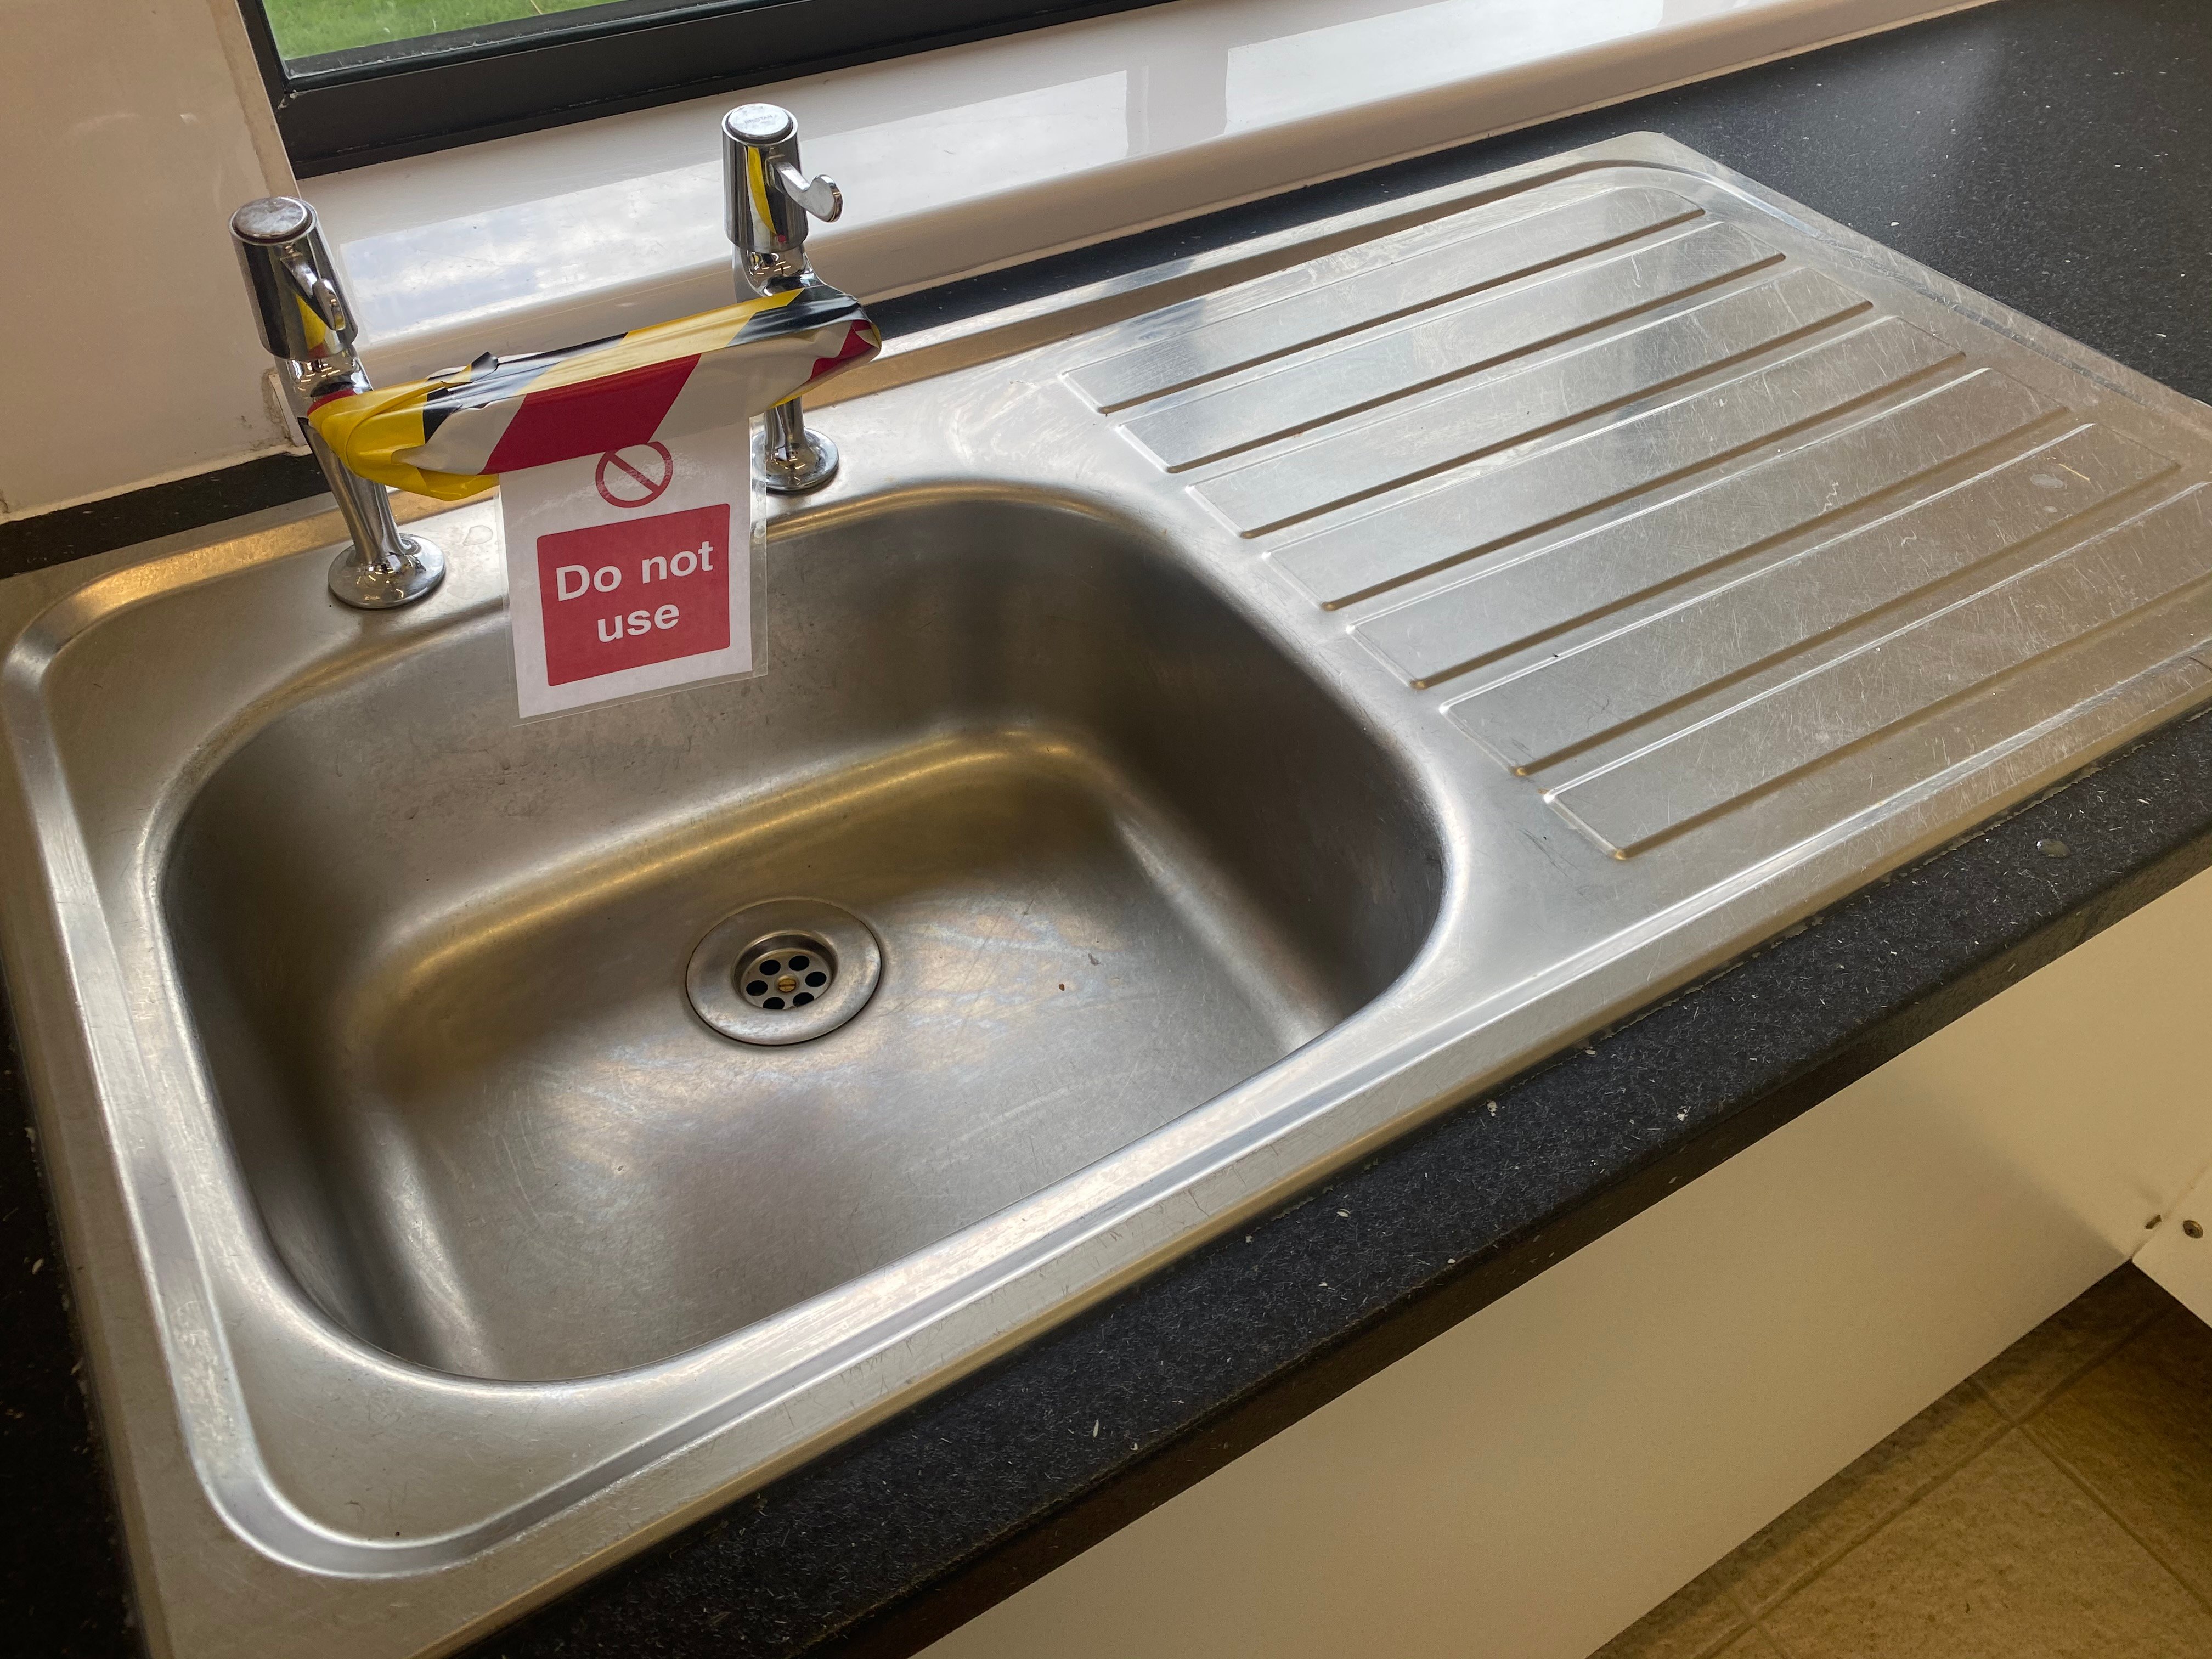 Sink with a sign on the taps saying 'do not use' during lockdown